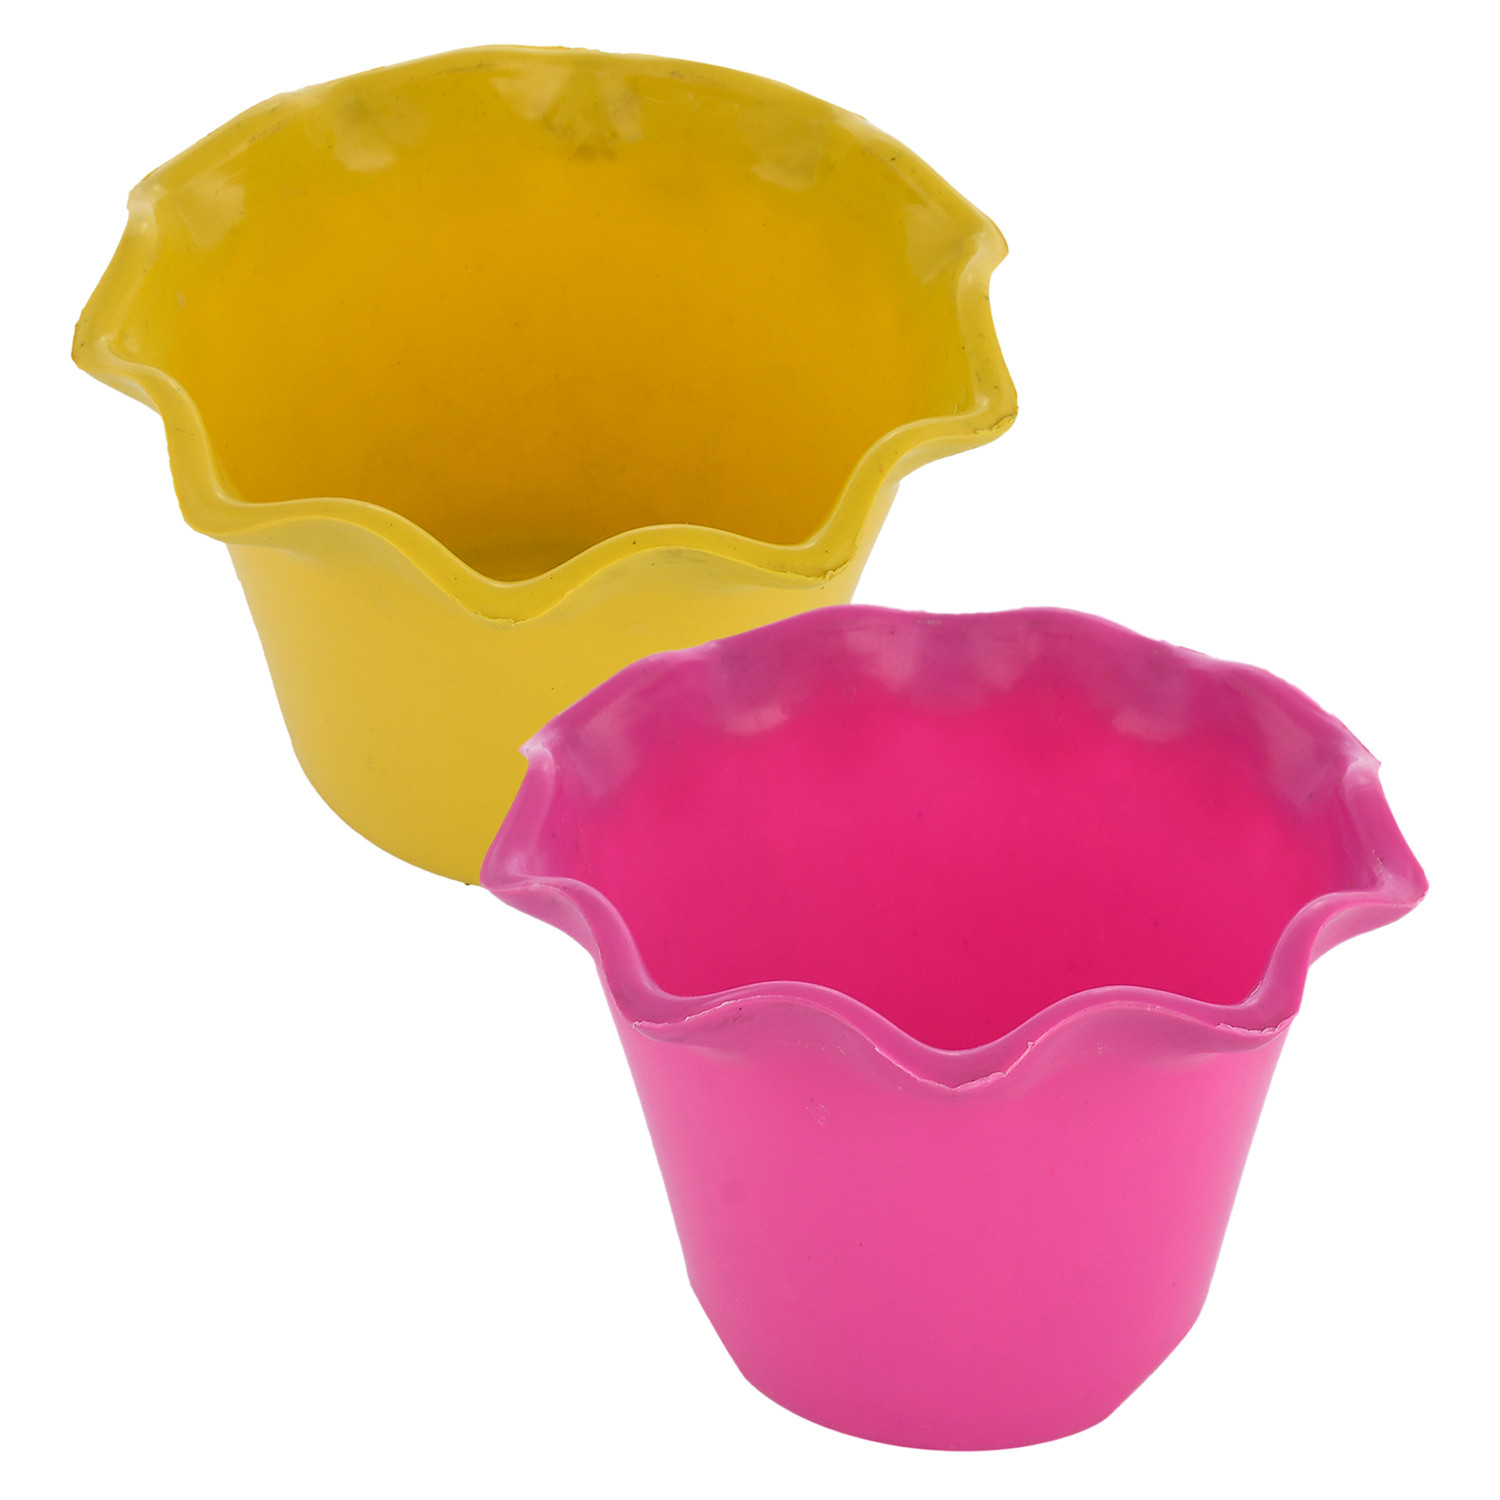 Kuber Industries Blossom Flower Pot|Durable Plastic Flower Pots|Planters for Home Décor|Garden|Living Room|Balcony|Pack of 2 (Pink & Yellow)